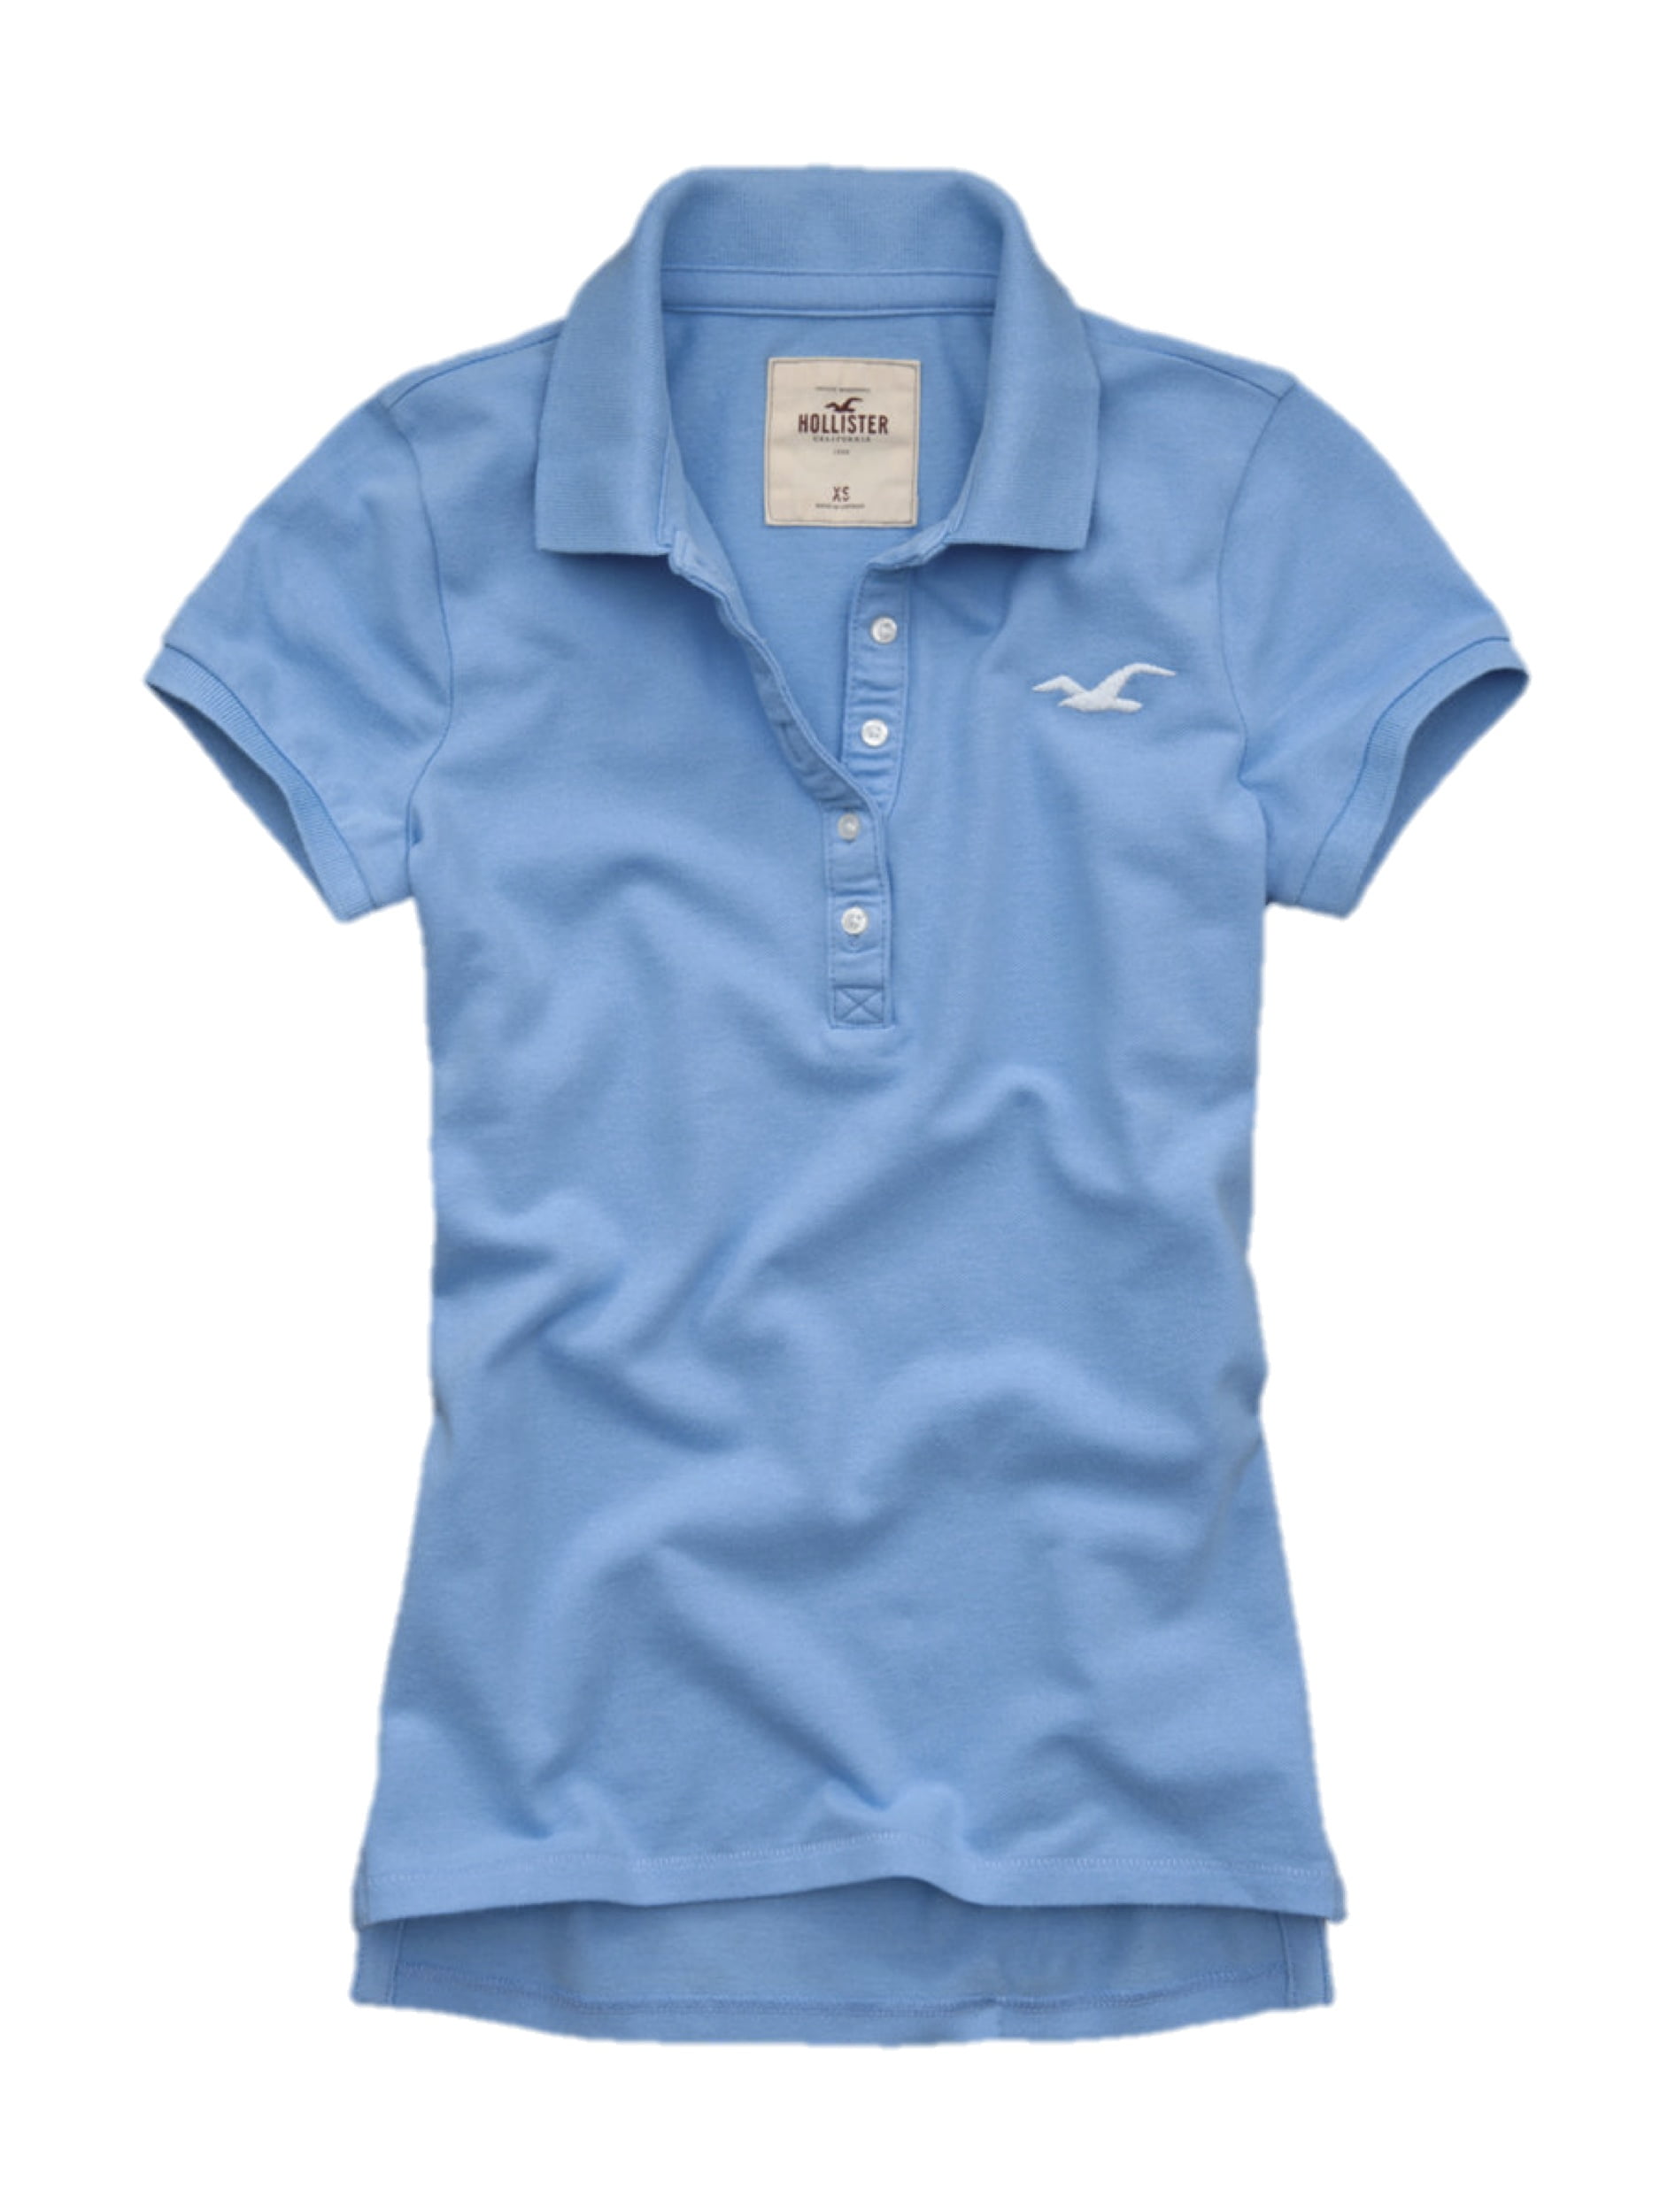 HOLLISTER Stretch Polo  T shirts for women, Clothes design, Tops